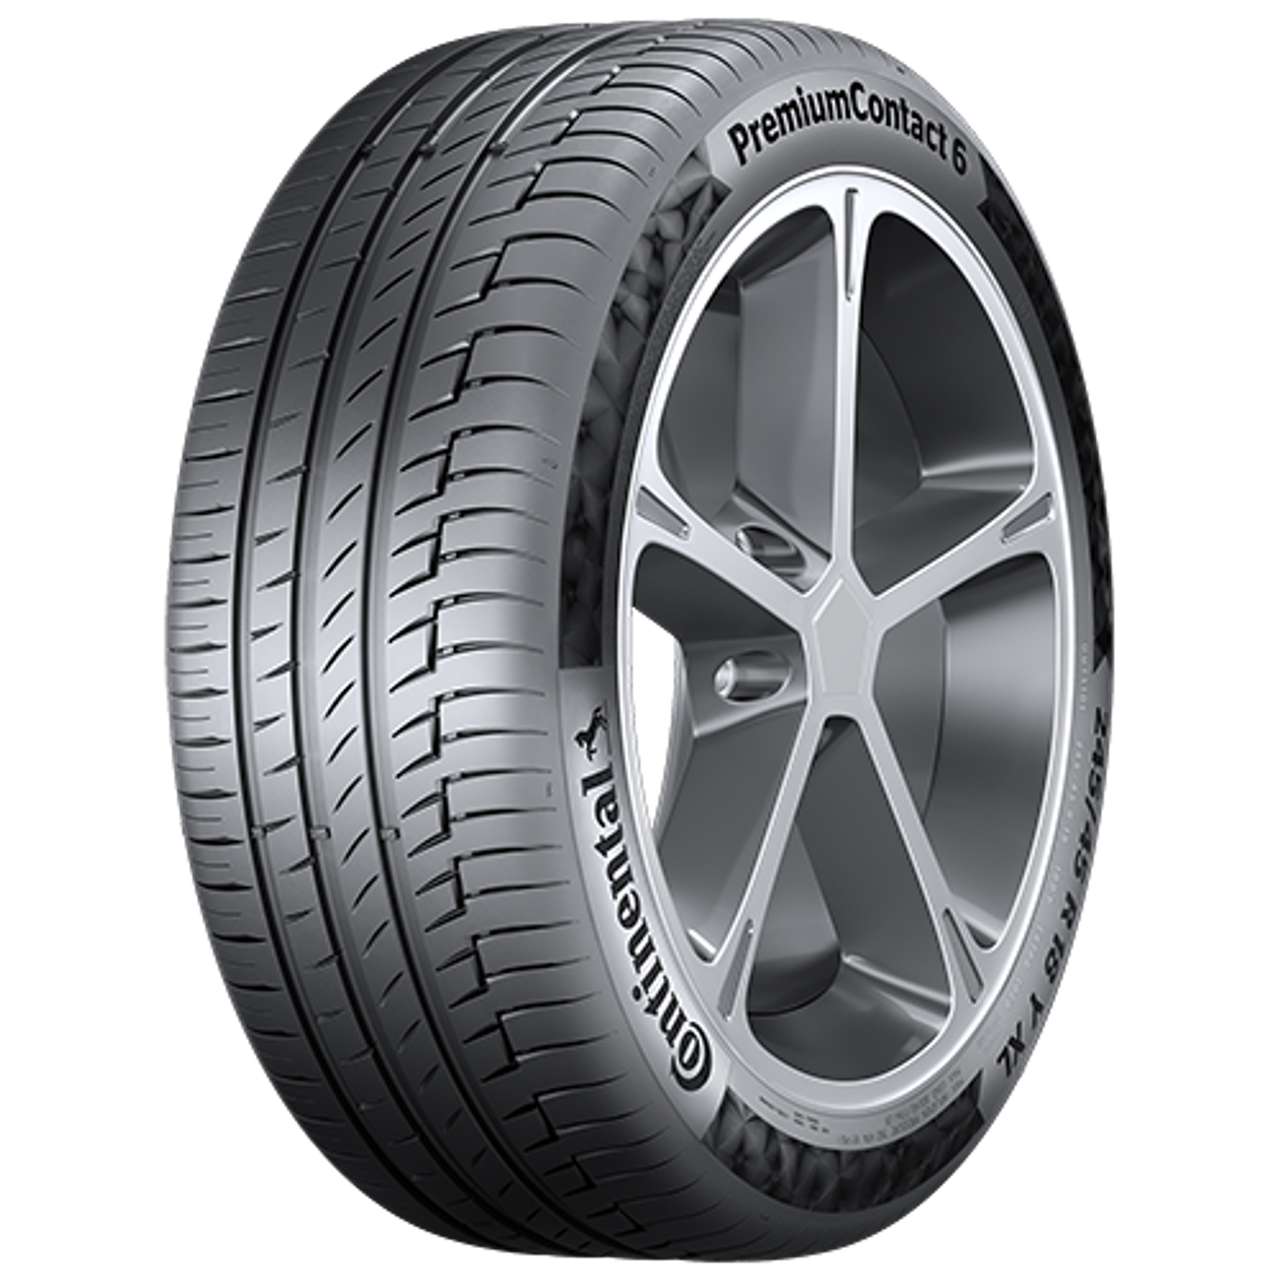 CONTINENTAL PREMIUMCONTACT 6 (*) (EVc) 225/50R18 99W BSW